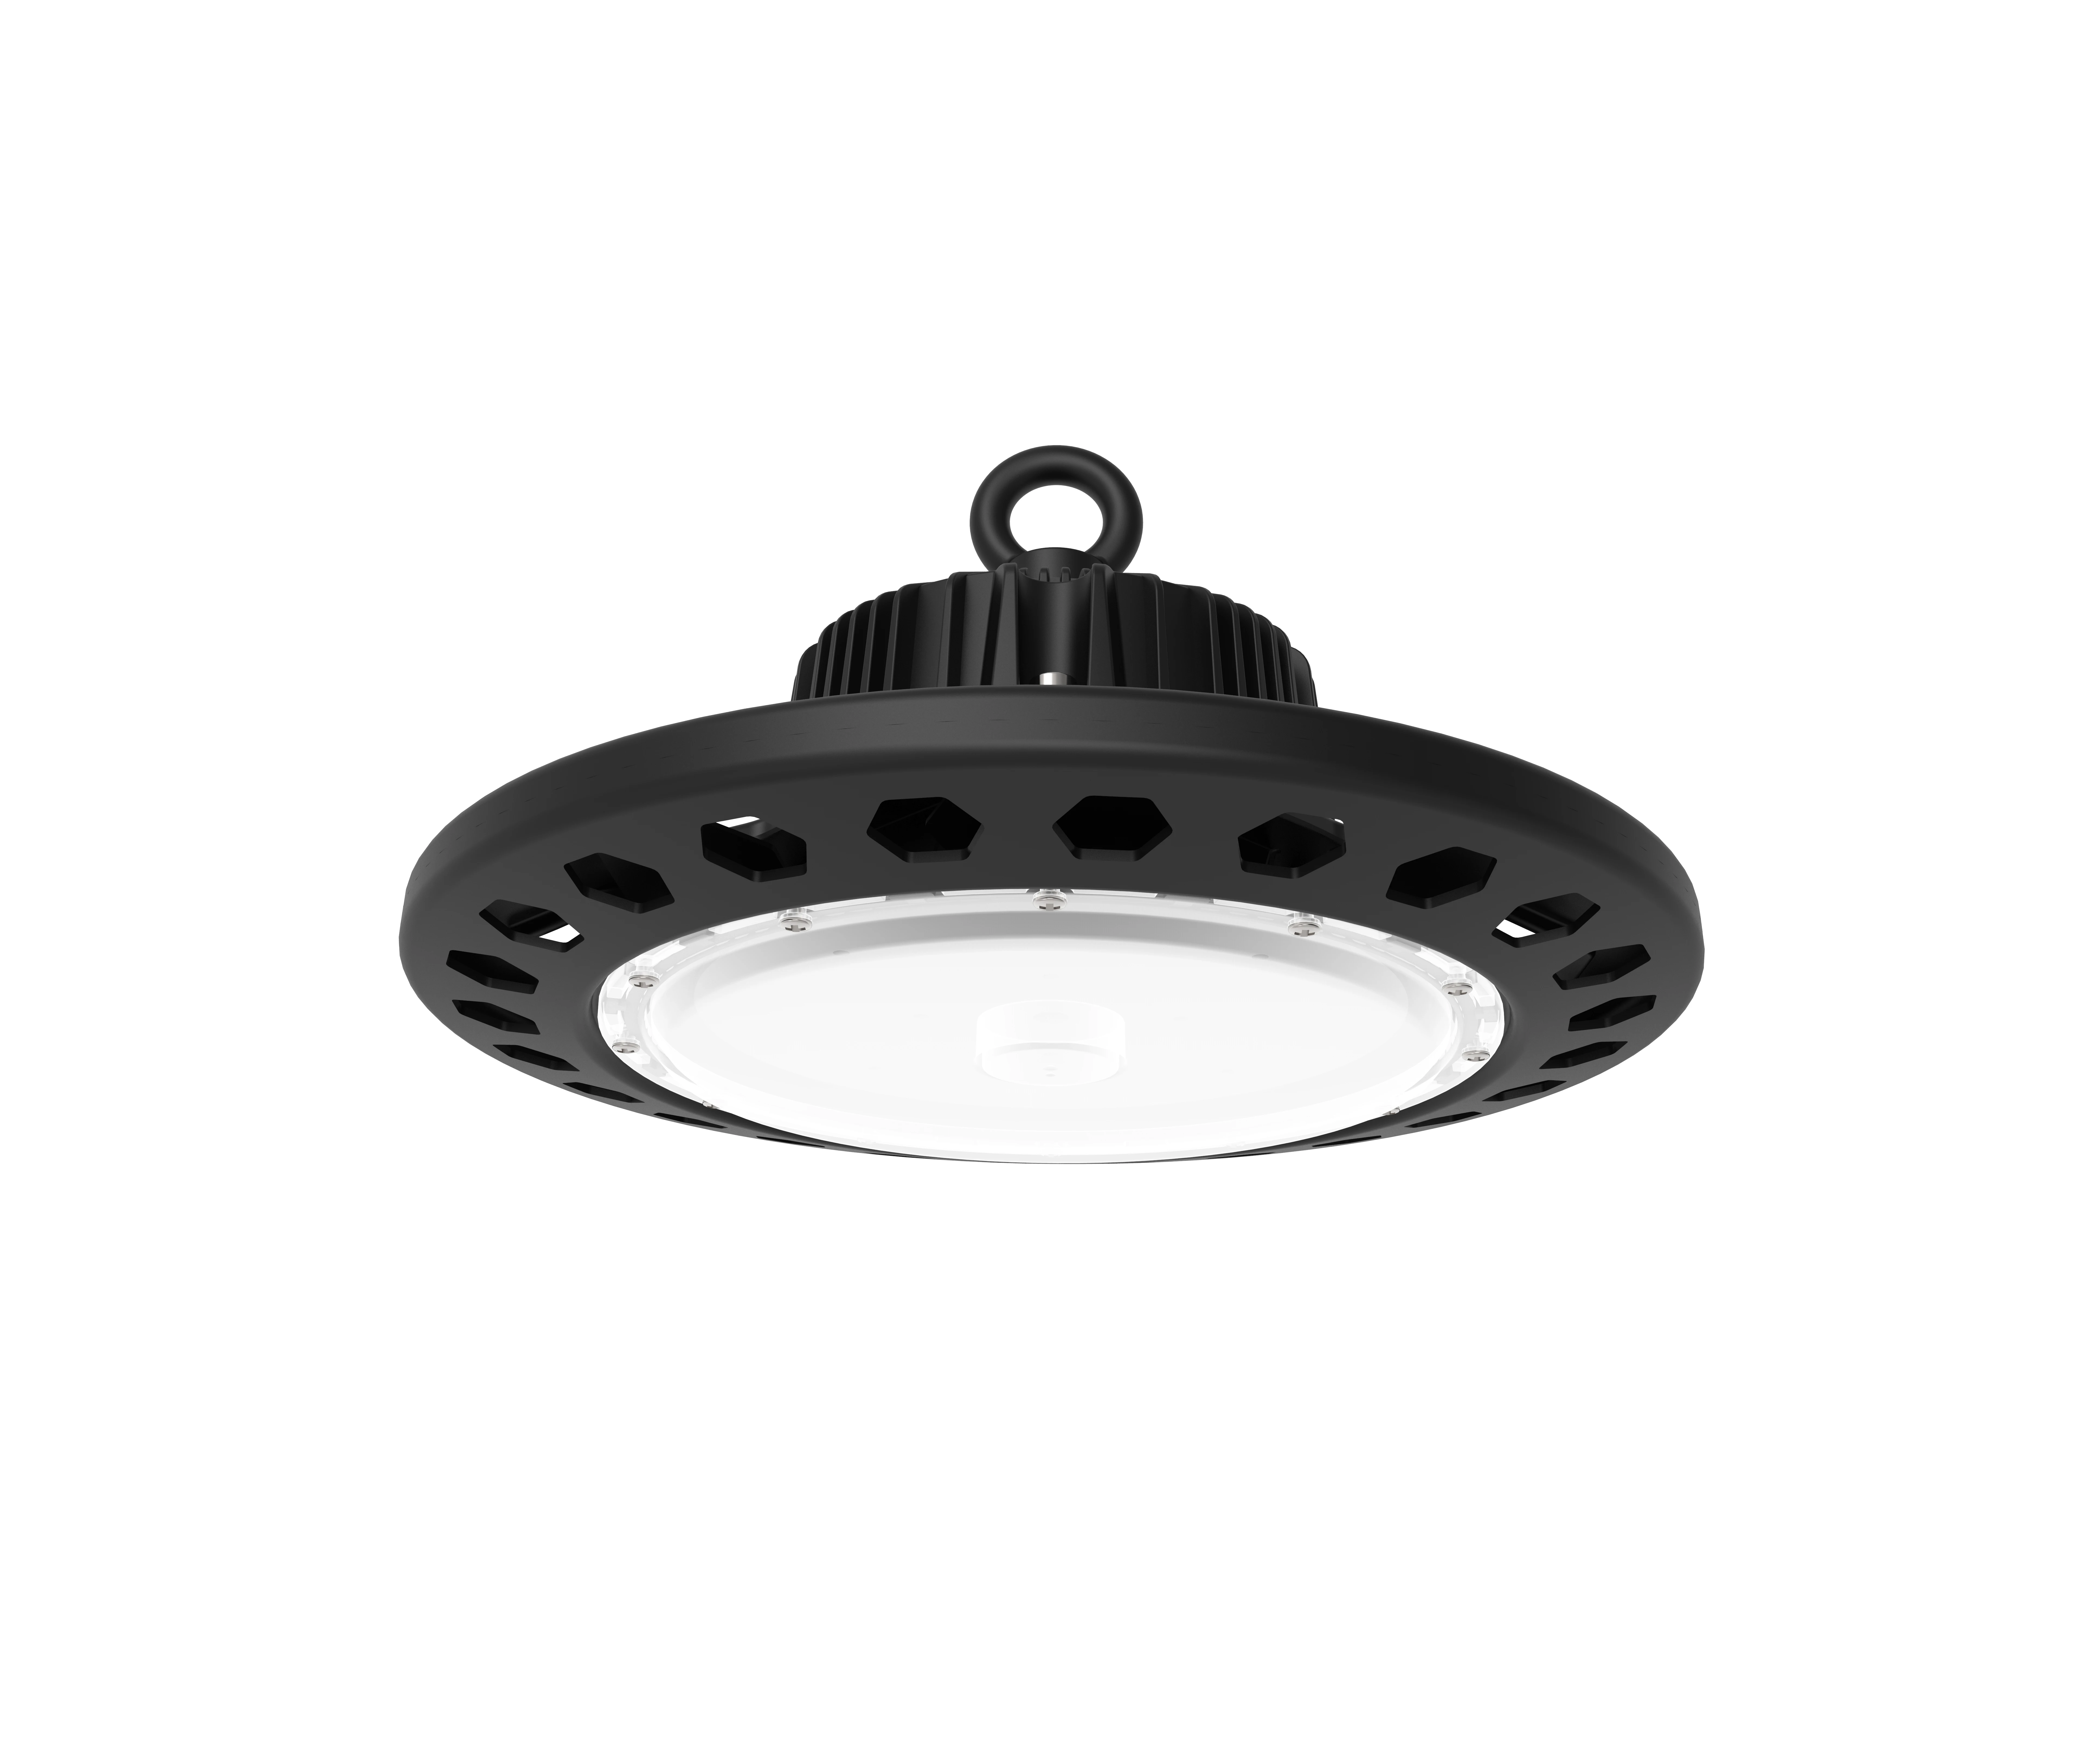 200W LED High Bay Light UFO Commercial Lamp Warehouse Lighting Industrial-Lights 